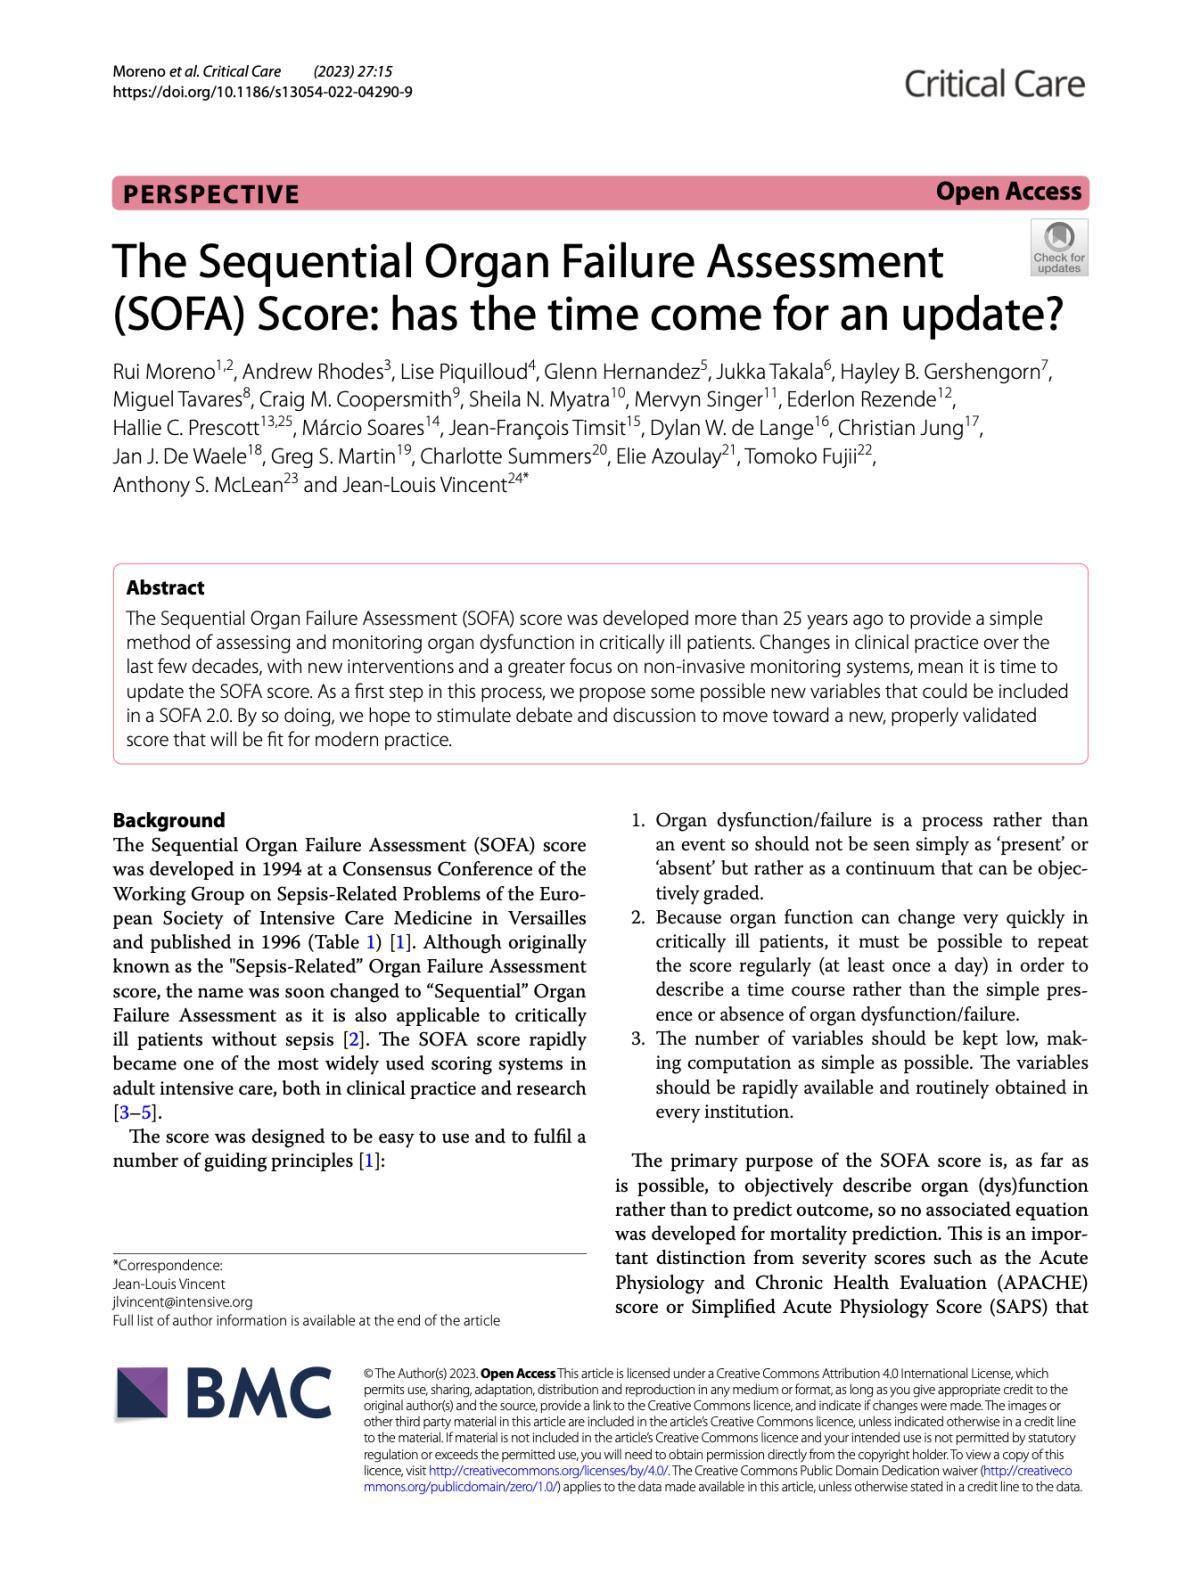 The Sequential Organ Failure Assessment (SOFA) Score: has the time come for an update?